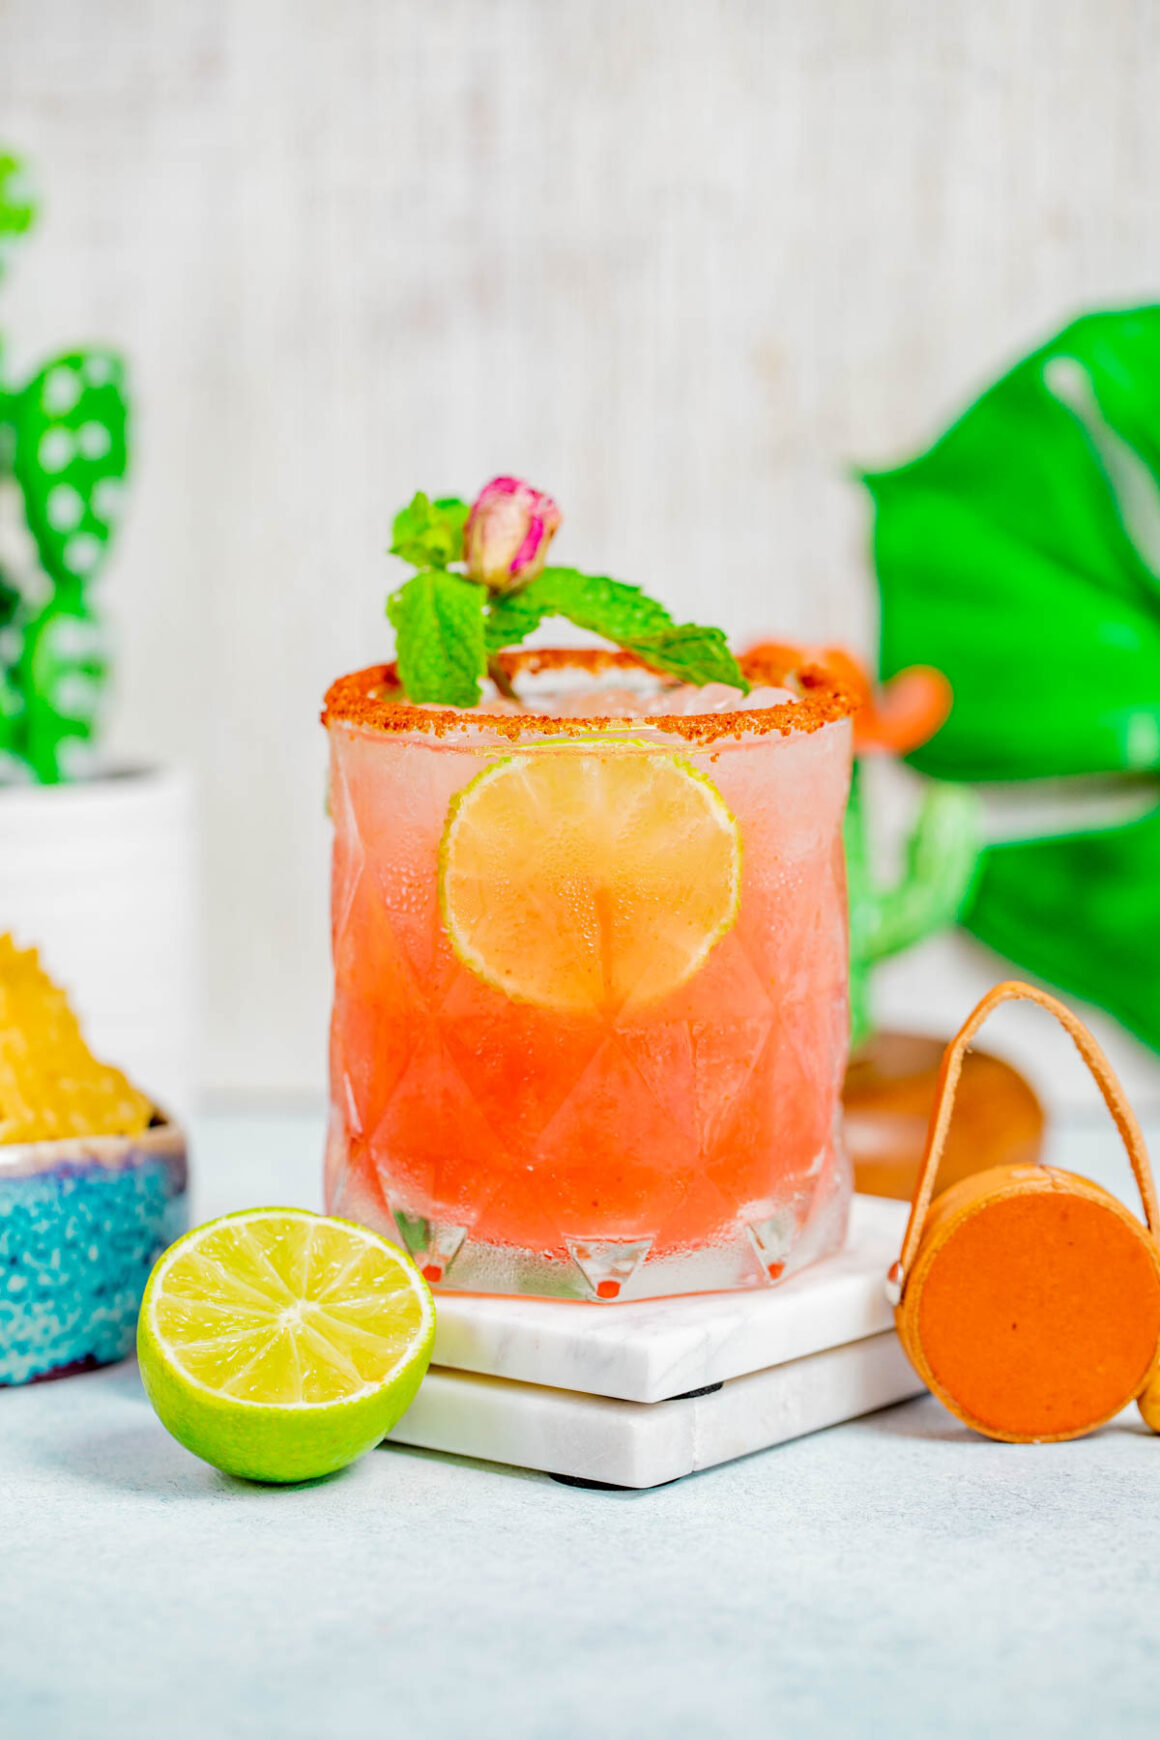 This recipe will guide you in making the perfect Guava Margarita.
